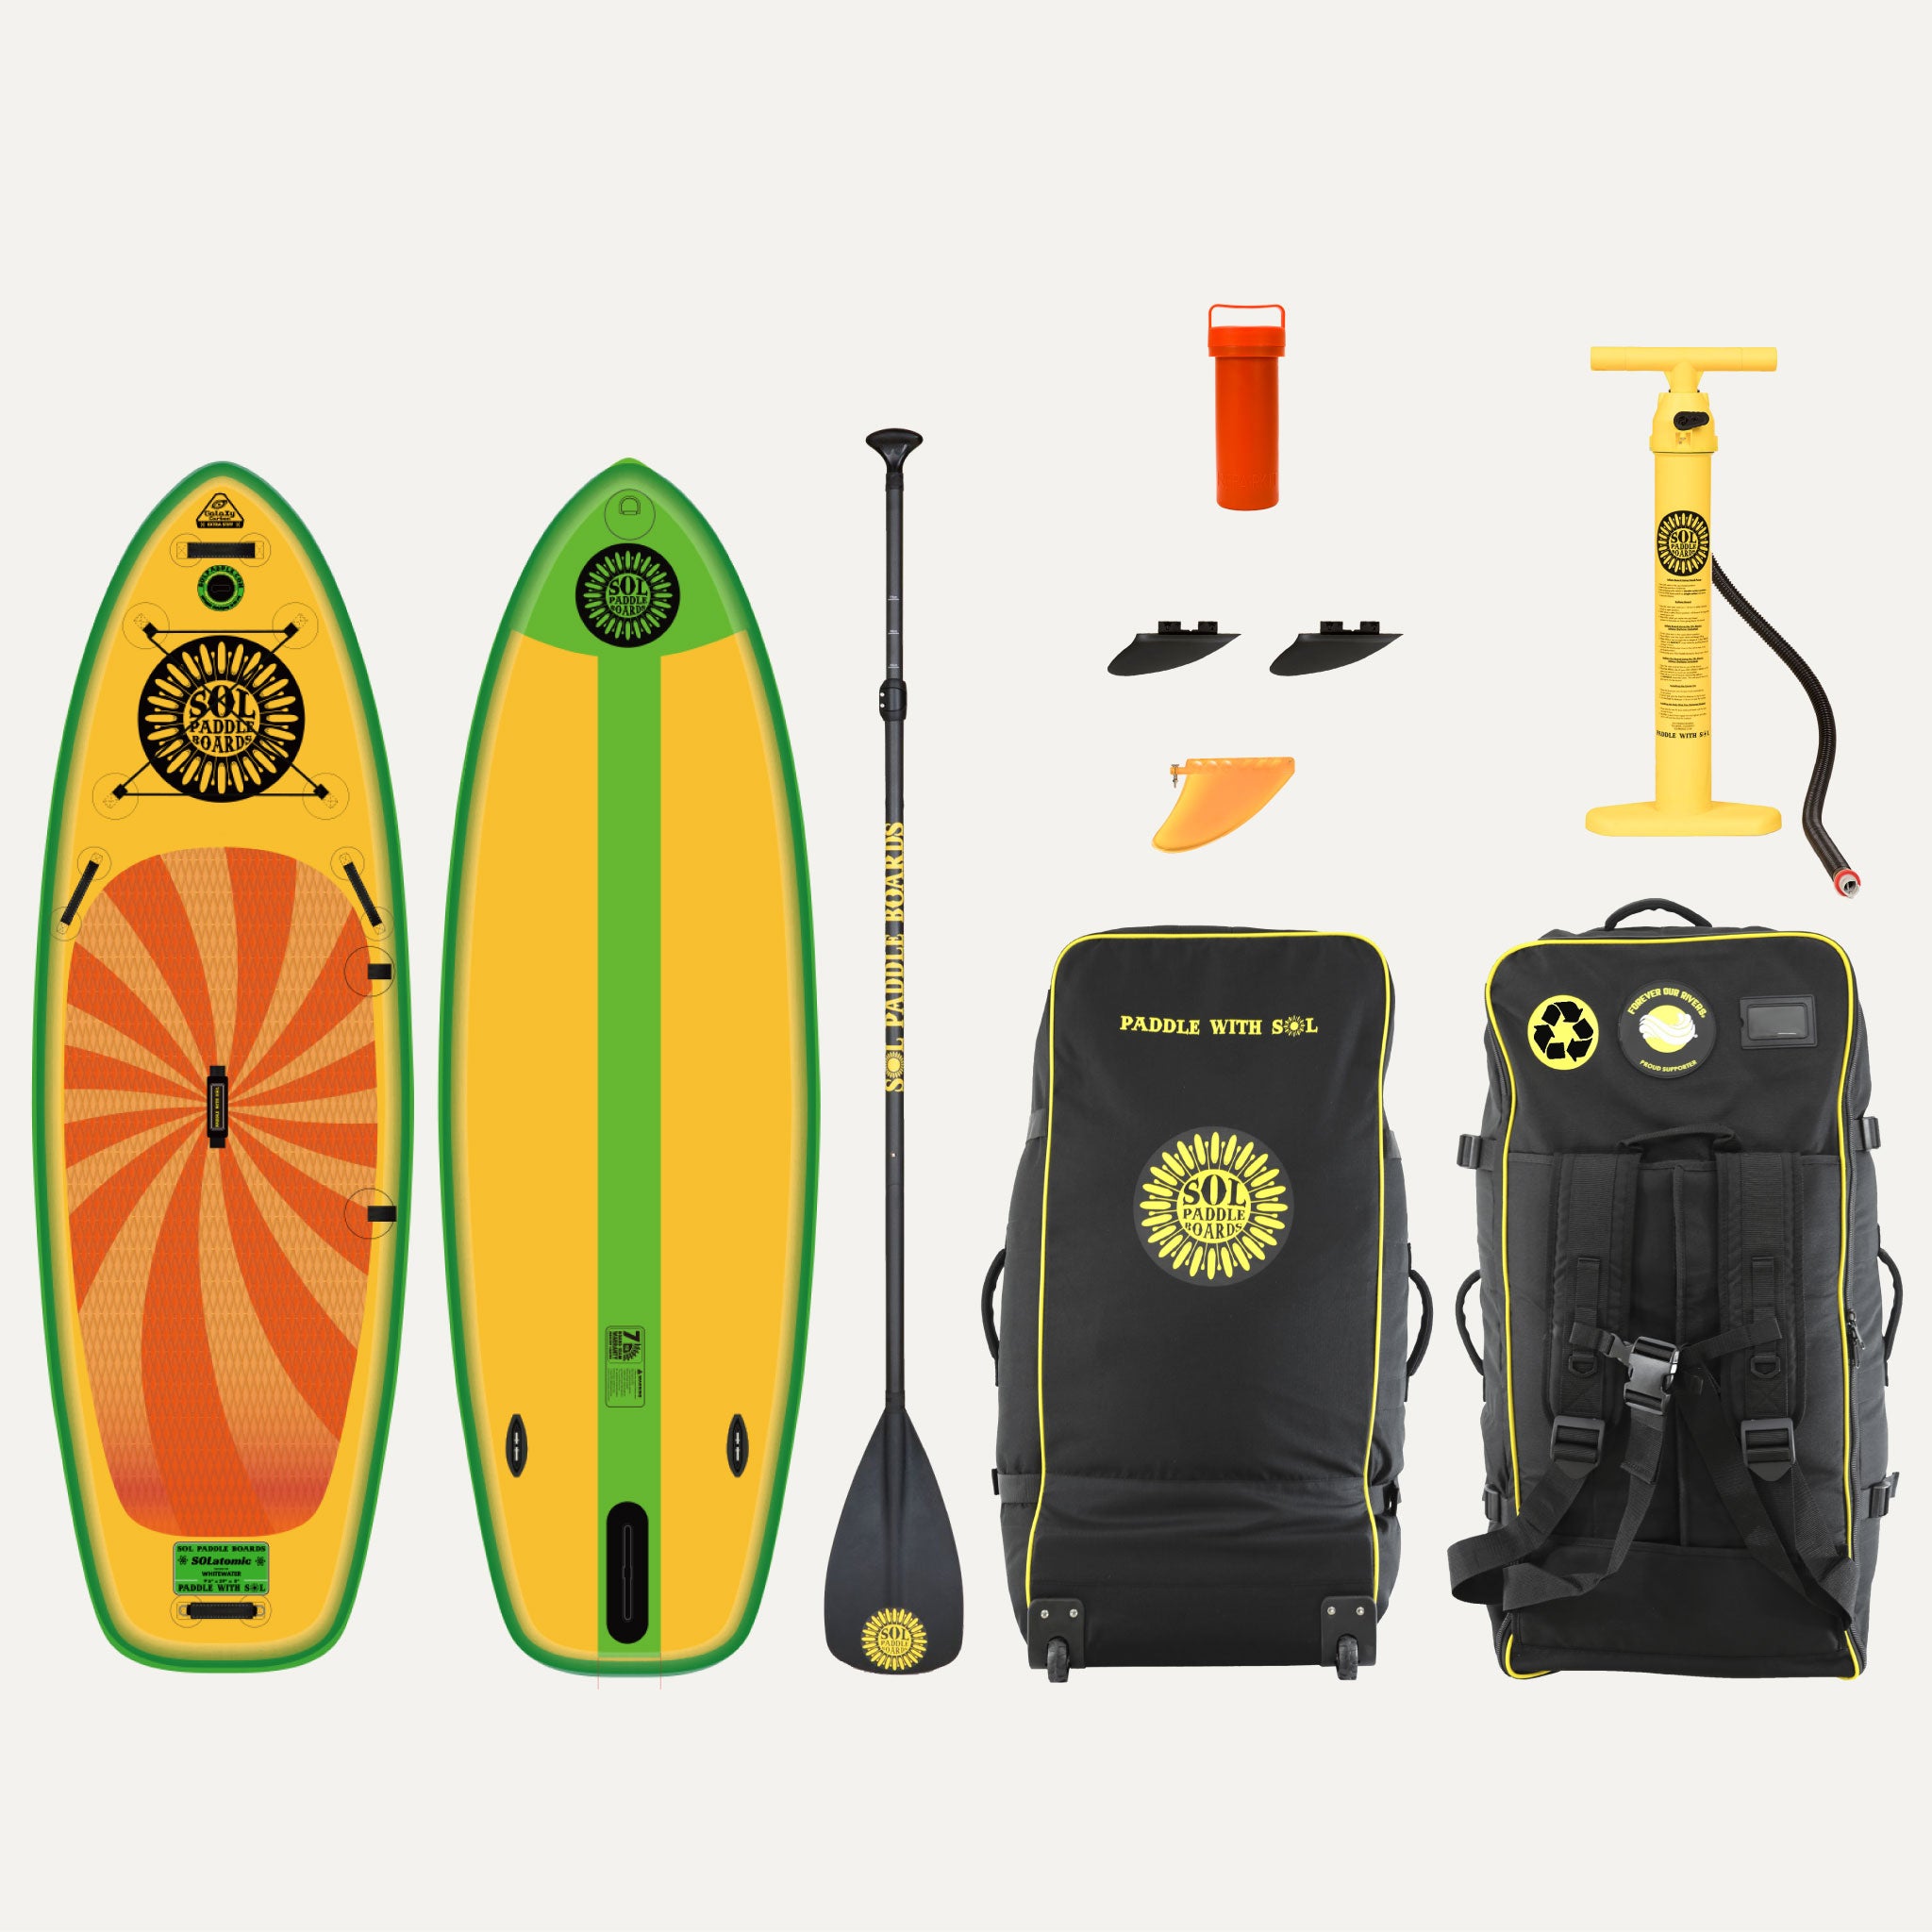 Infinity SOLatomic Inflatable Paddle Board showcasing the top and bottom views of the SUP board and the accessories that come with it